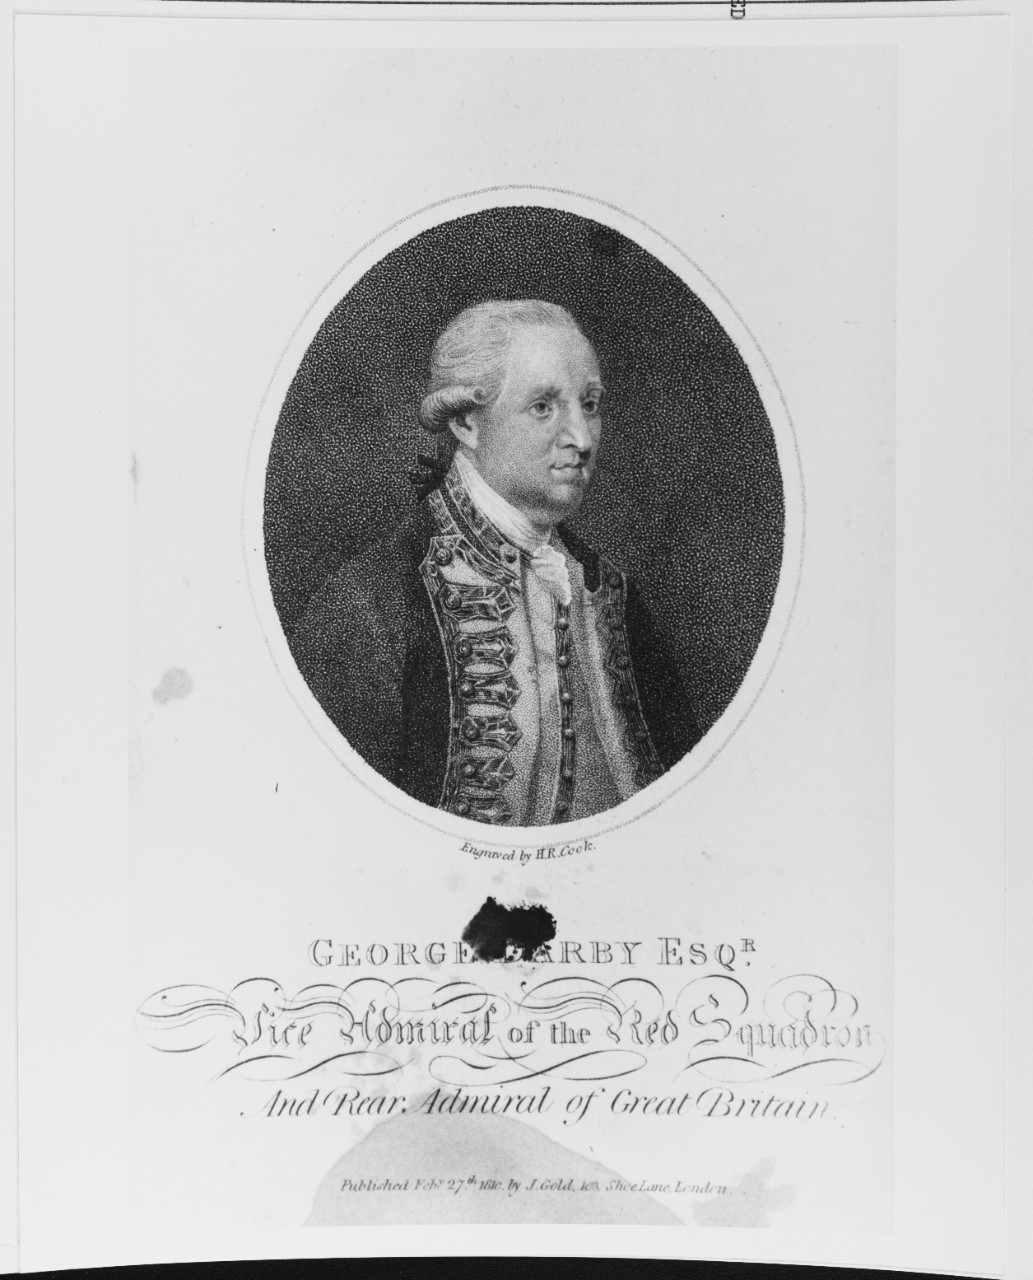 George Darby (17? - 1790), English Vice Admiral